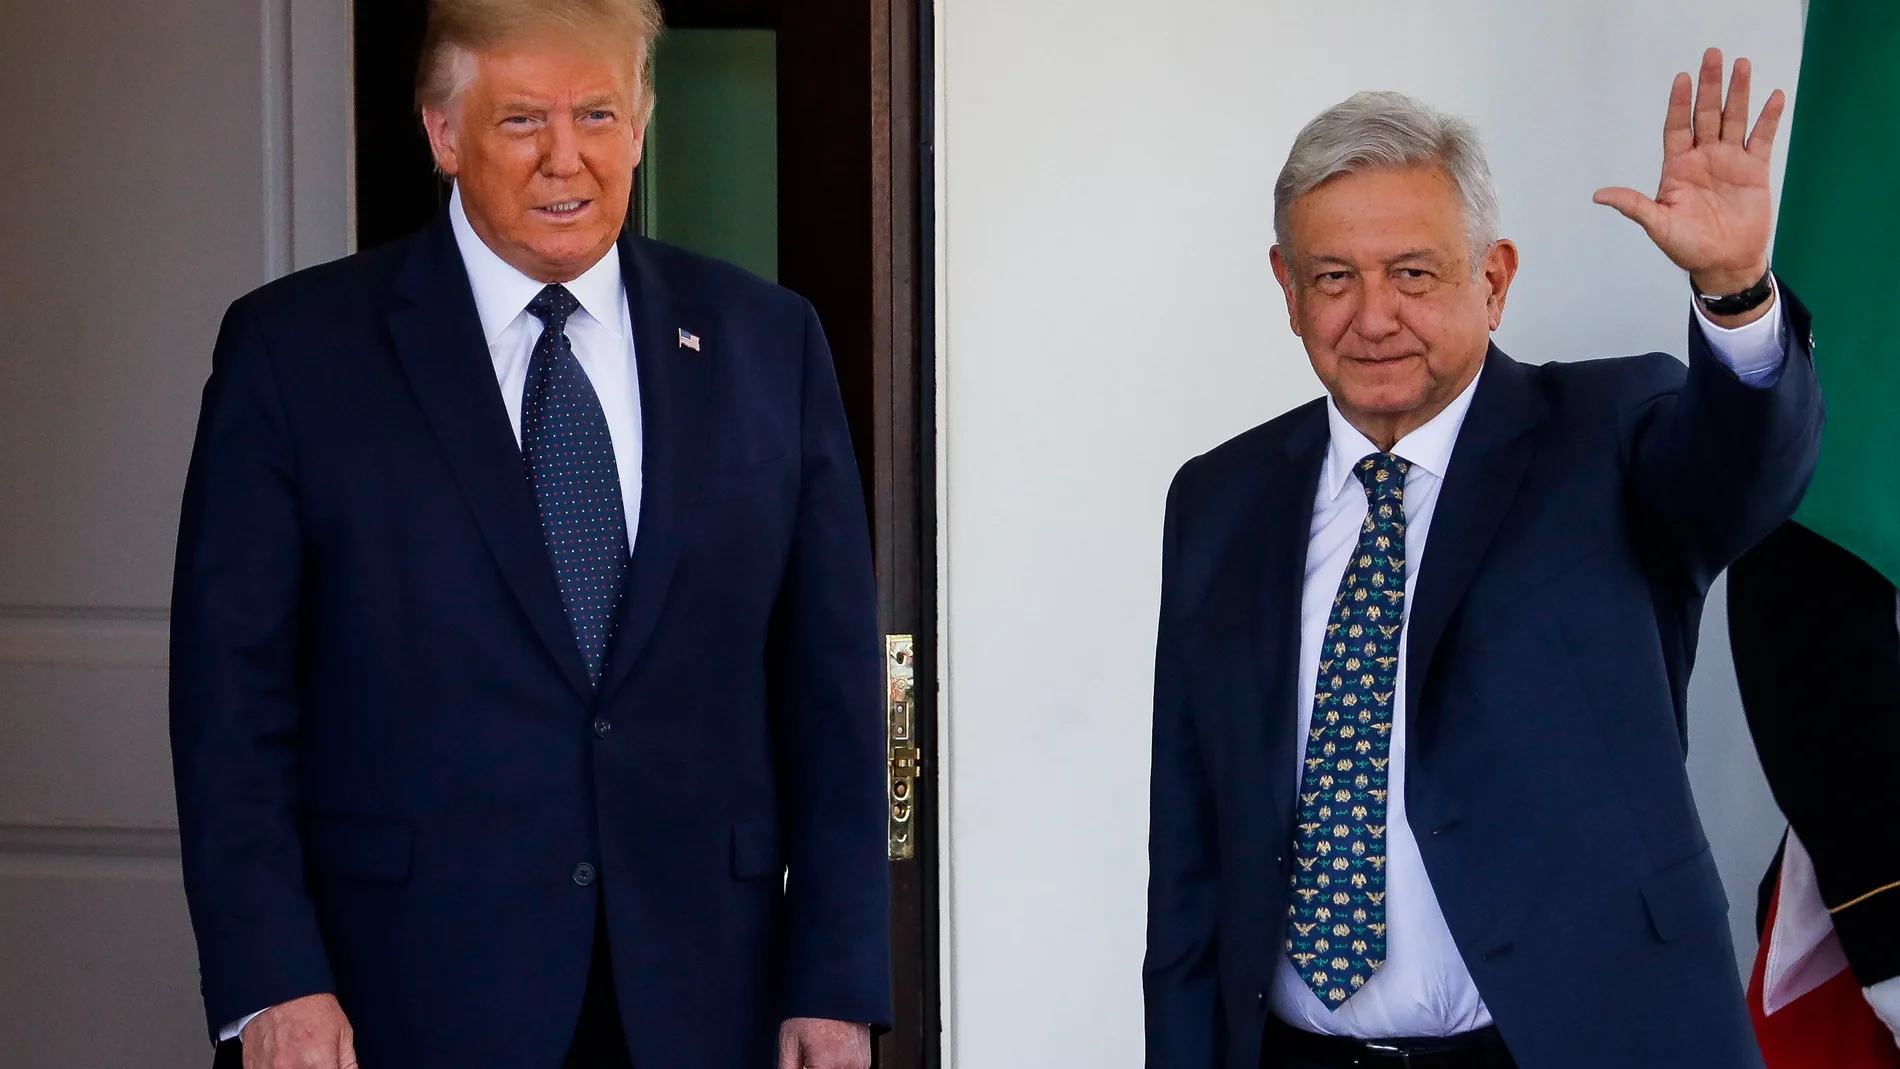 US President Trump welcomes Mexican president Obrador at the White House